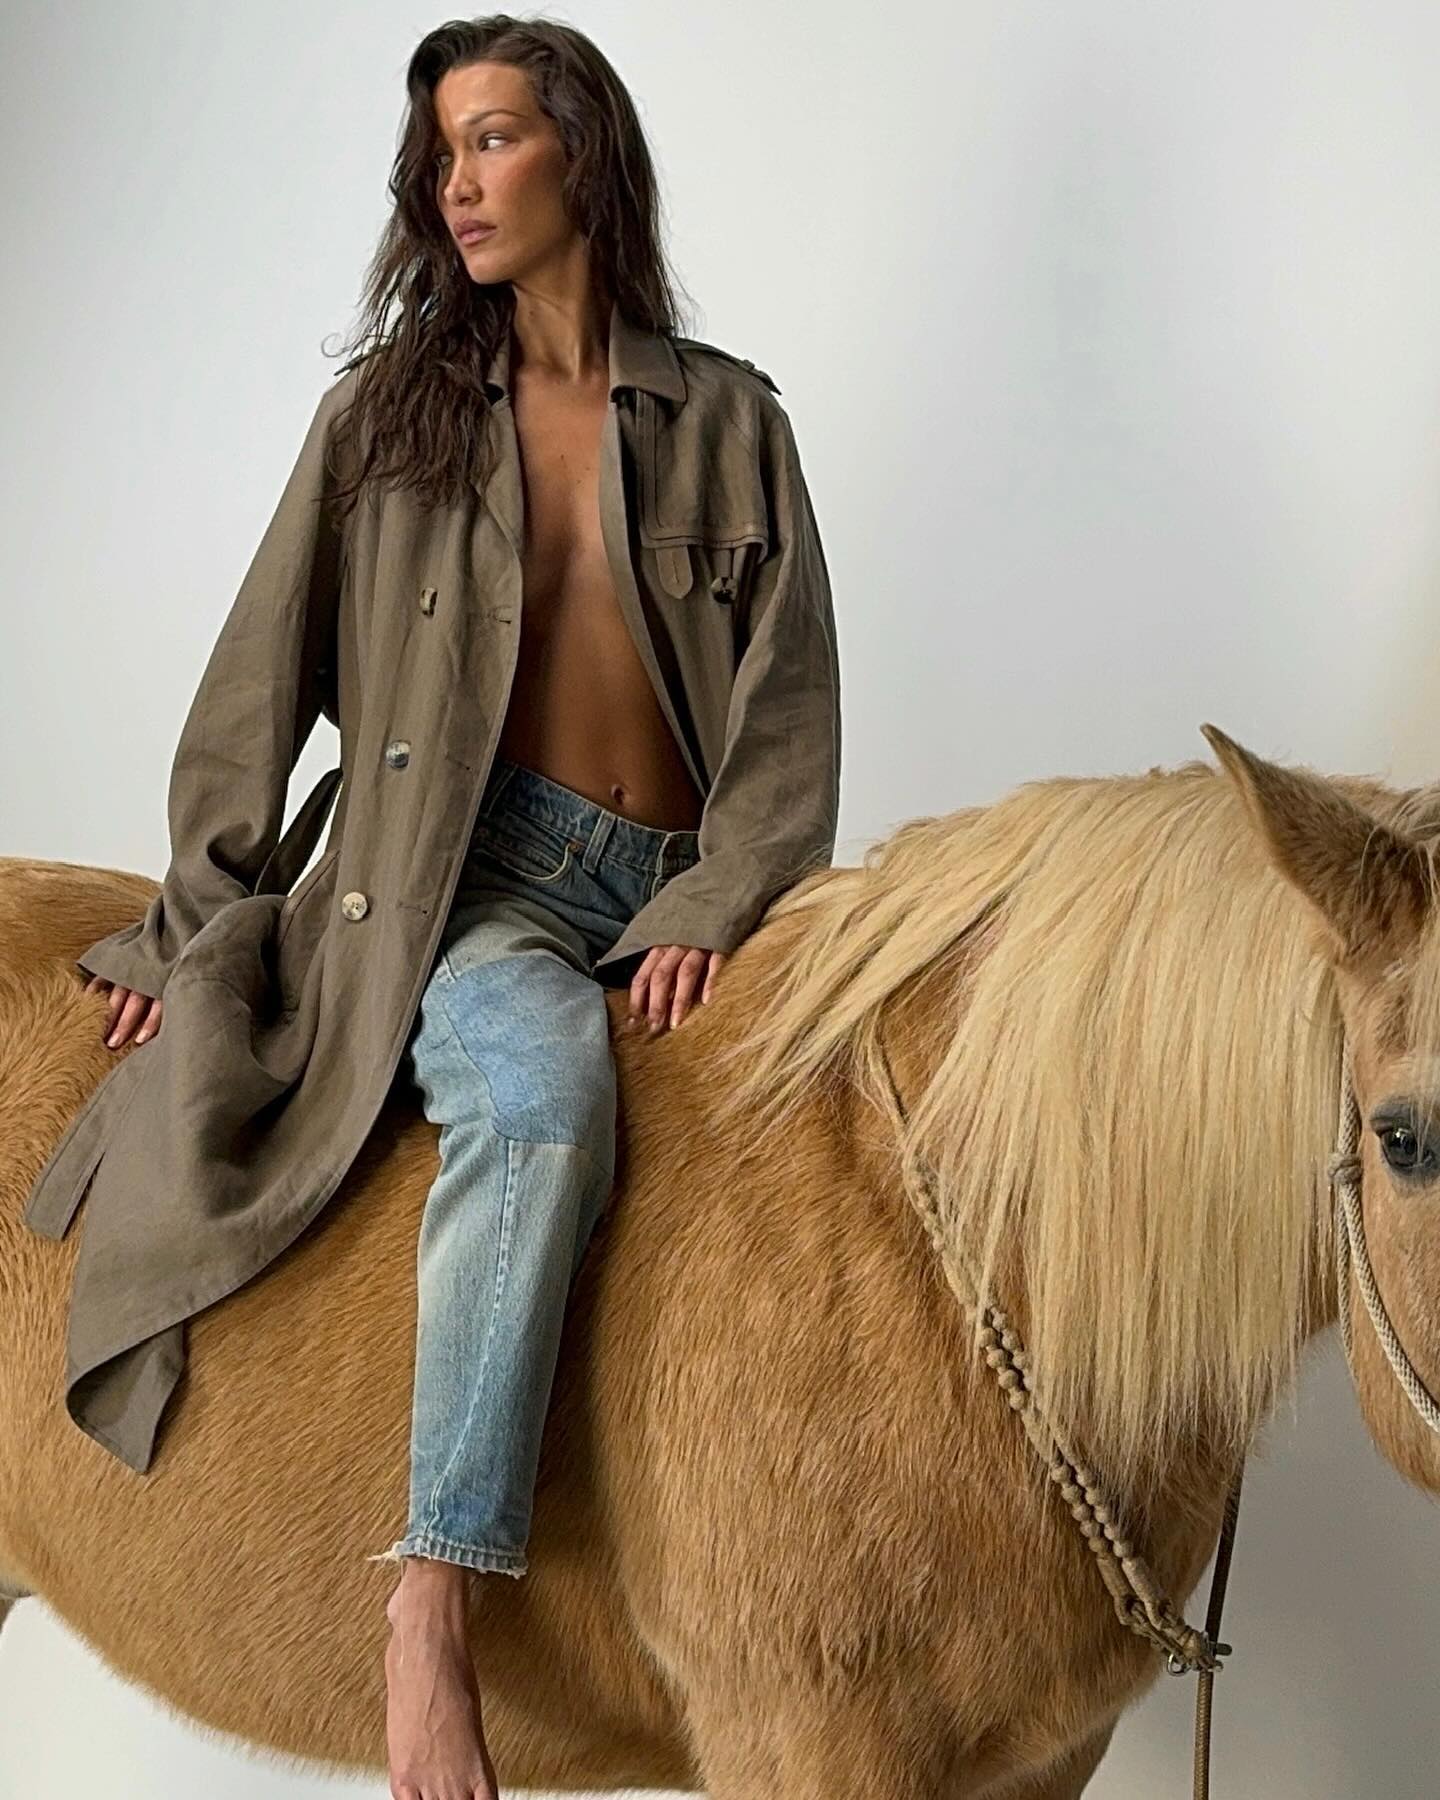 Bella Hadid is Horsing Around on the Set of Her New Vogue Shoot! - Photo 5